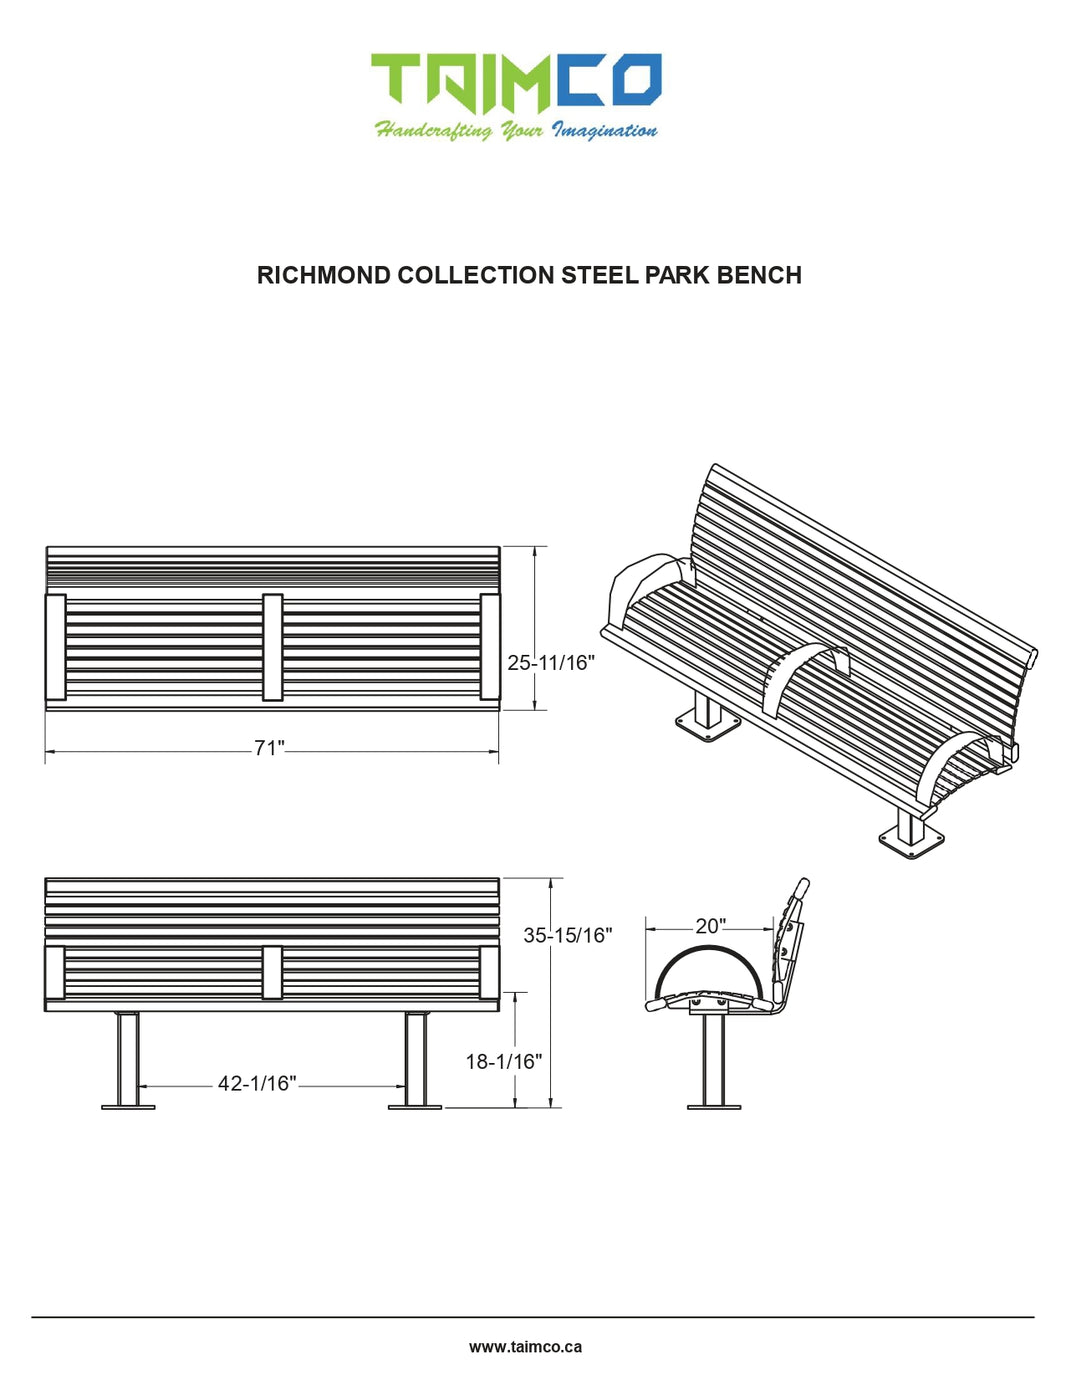 Metal Bench With Steel Tube Legs and Feet | Model MB209